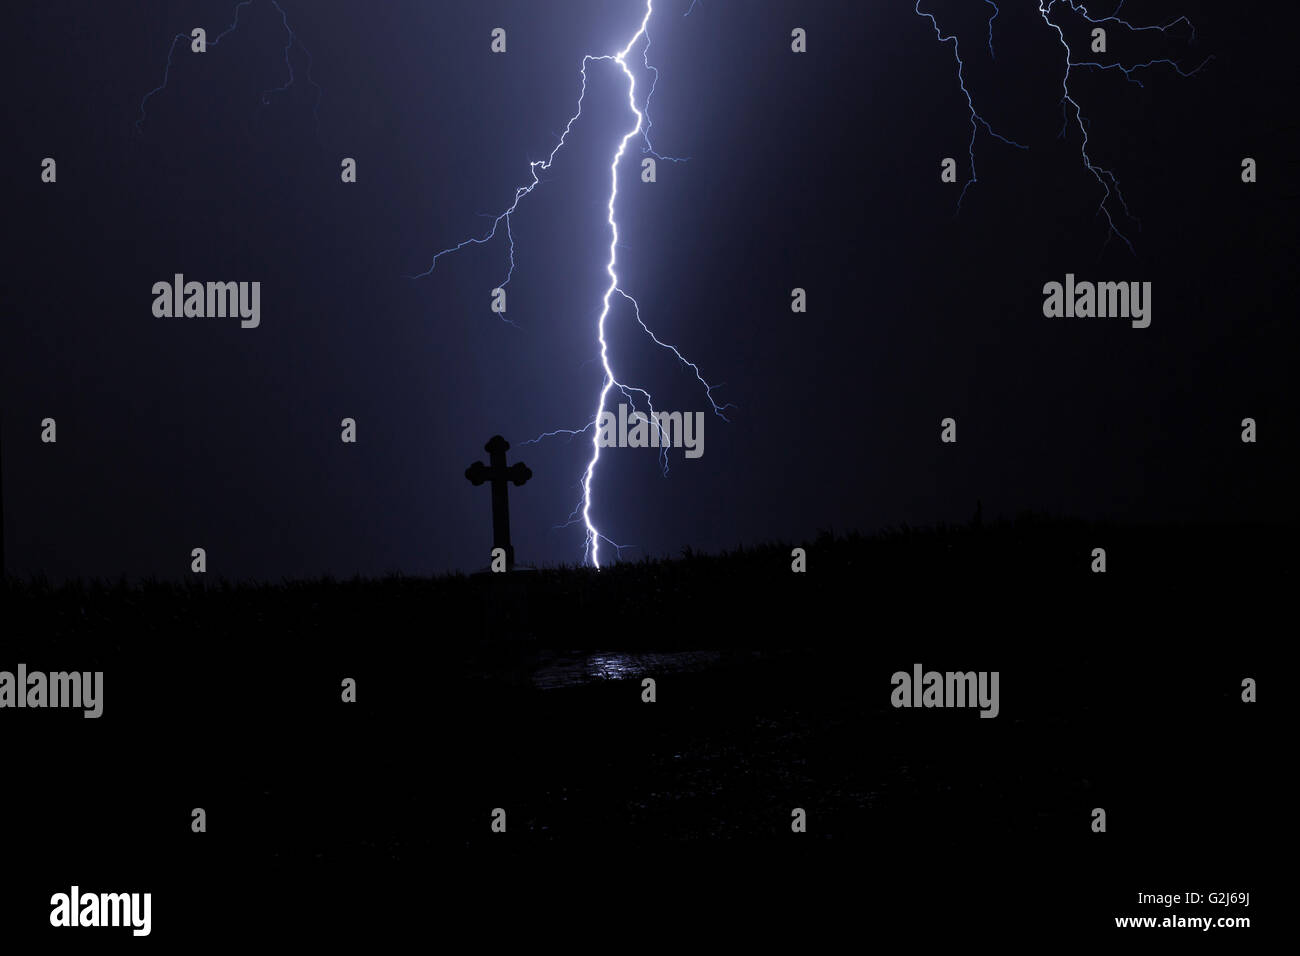 Lightning in a storm with a cross and reflection of the lightning Stock Photo